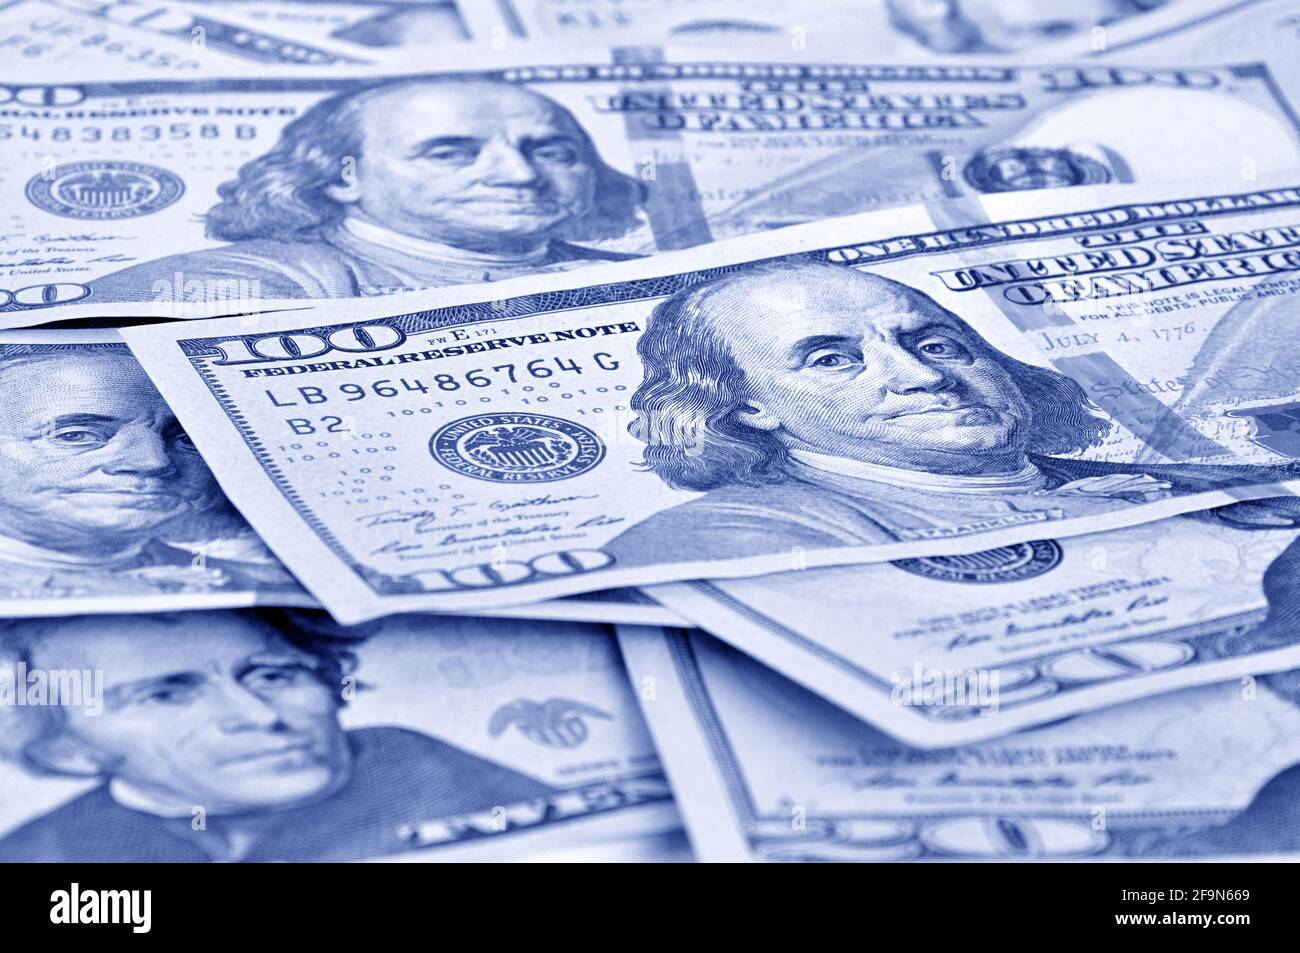 Money - United States dollars (USD) bills in retro blue color effect Stock Photo